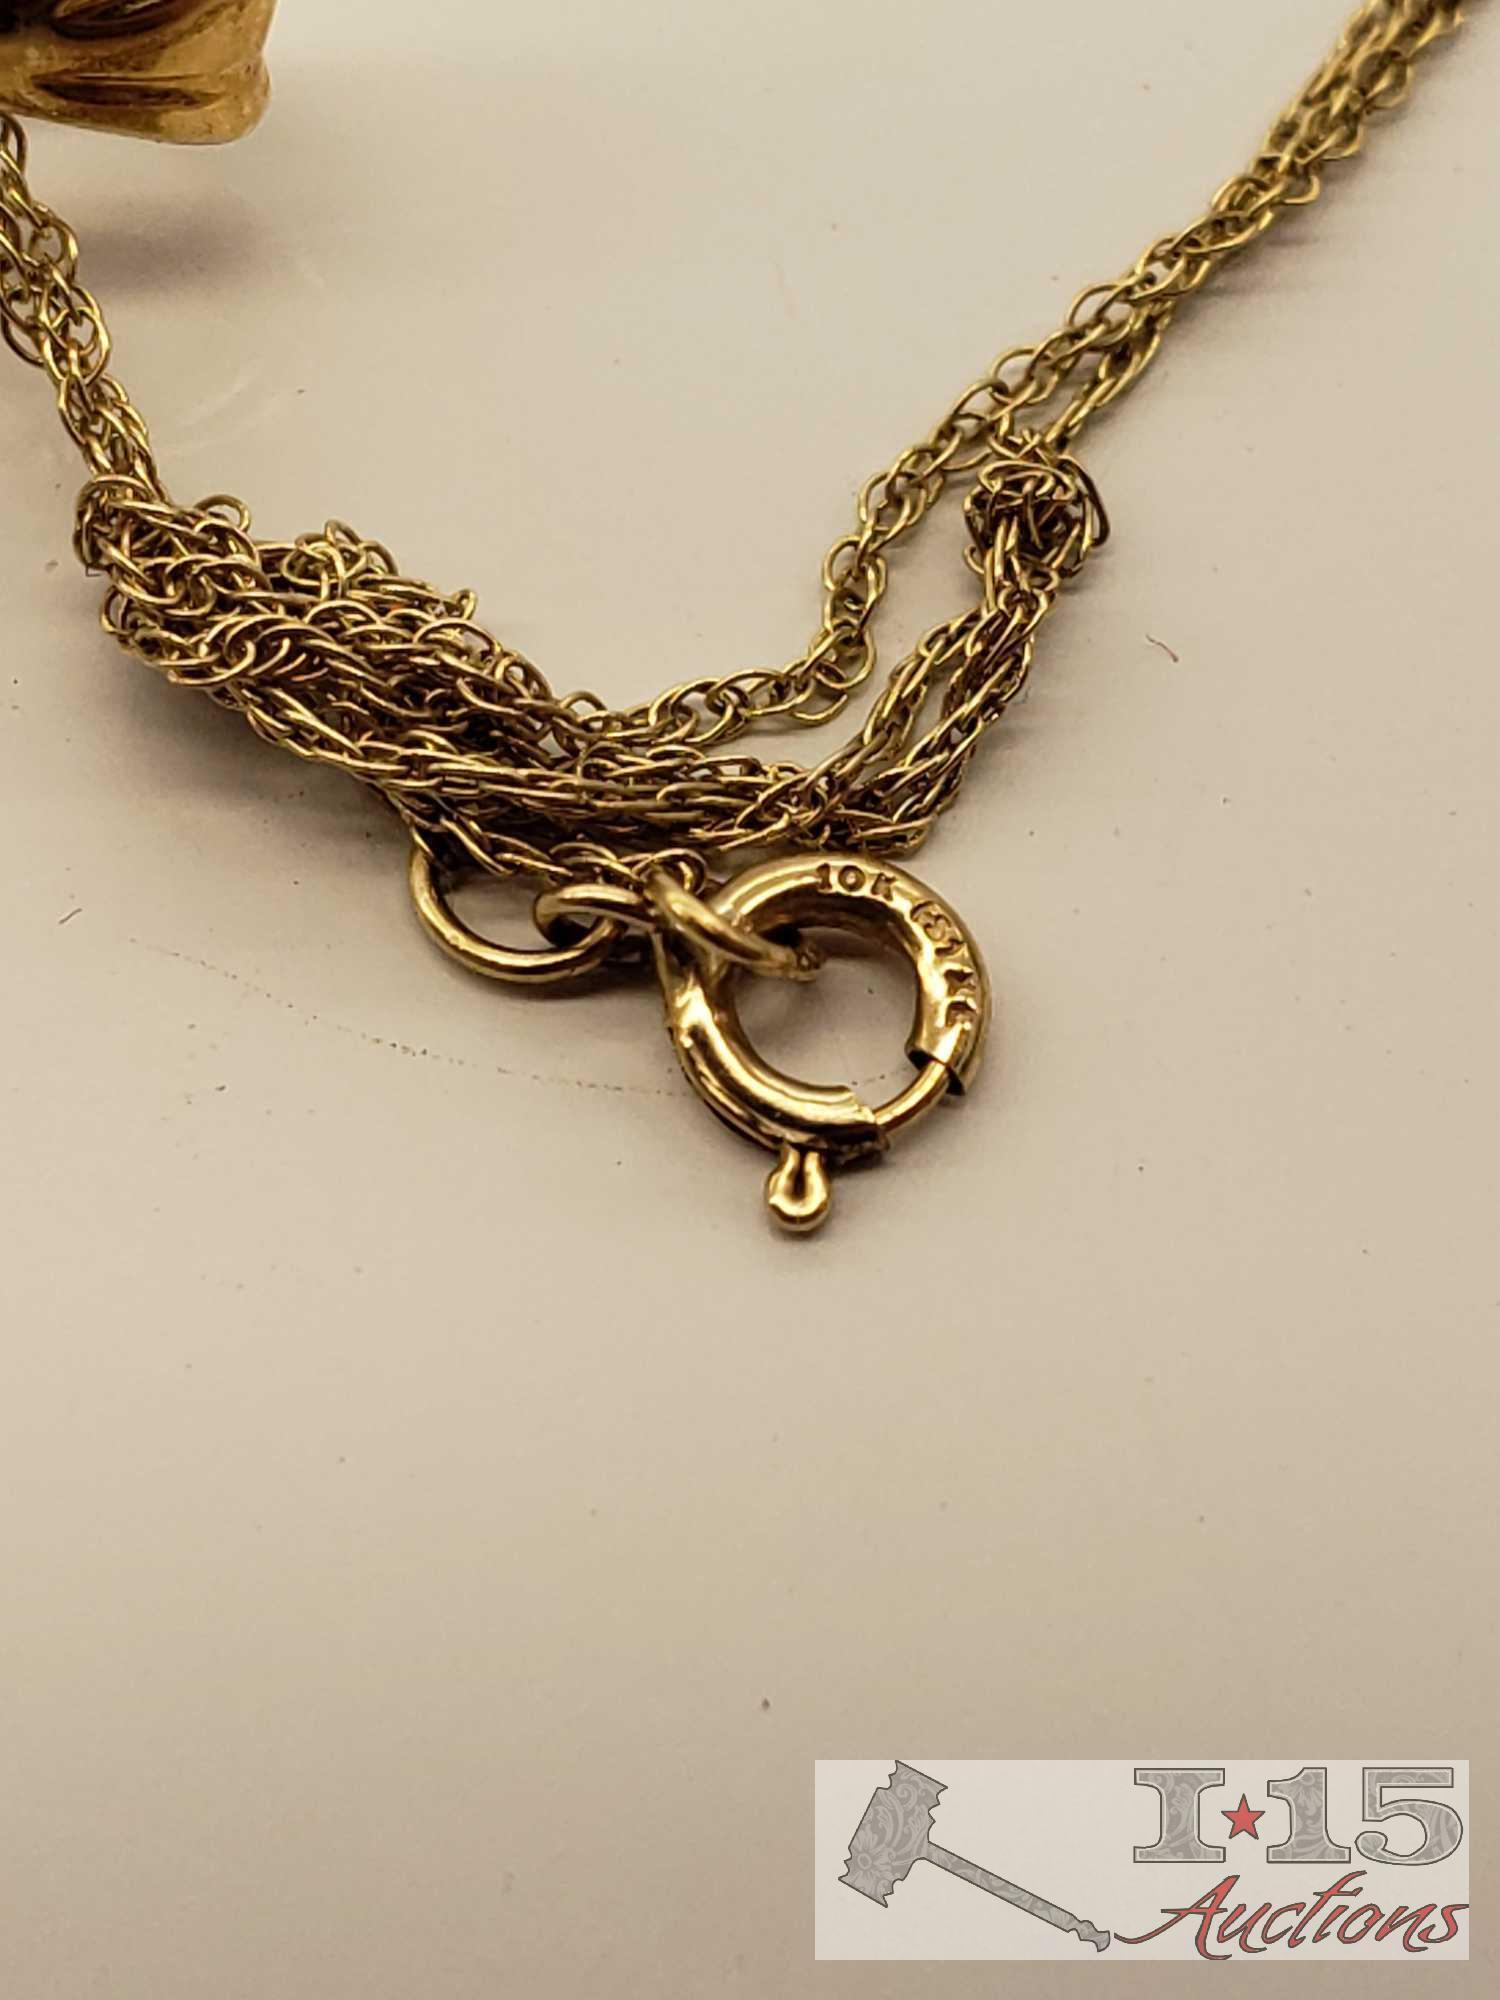 10k Gold Necklace with Pendant, 10k Pendant, and 10k Gold Pair of Earrings